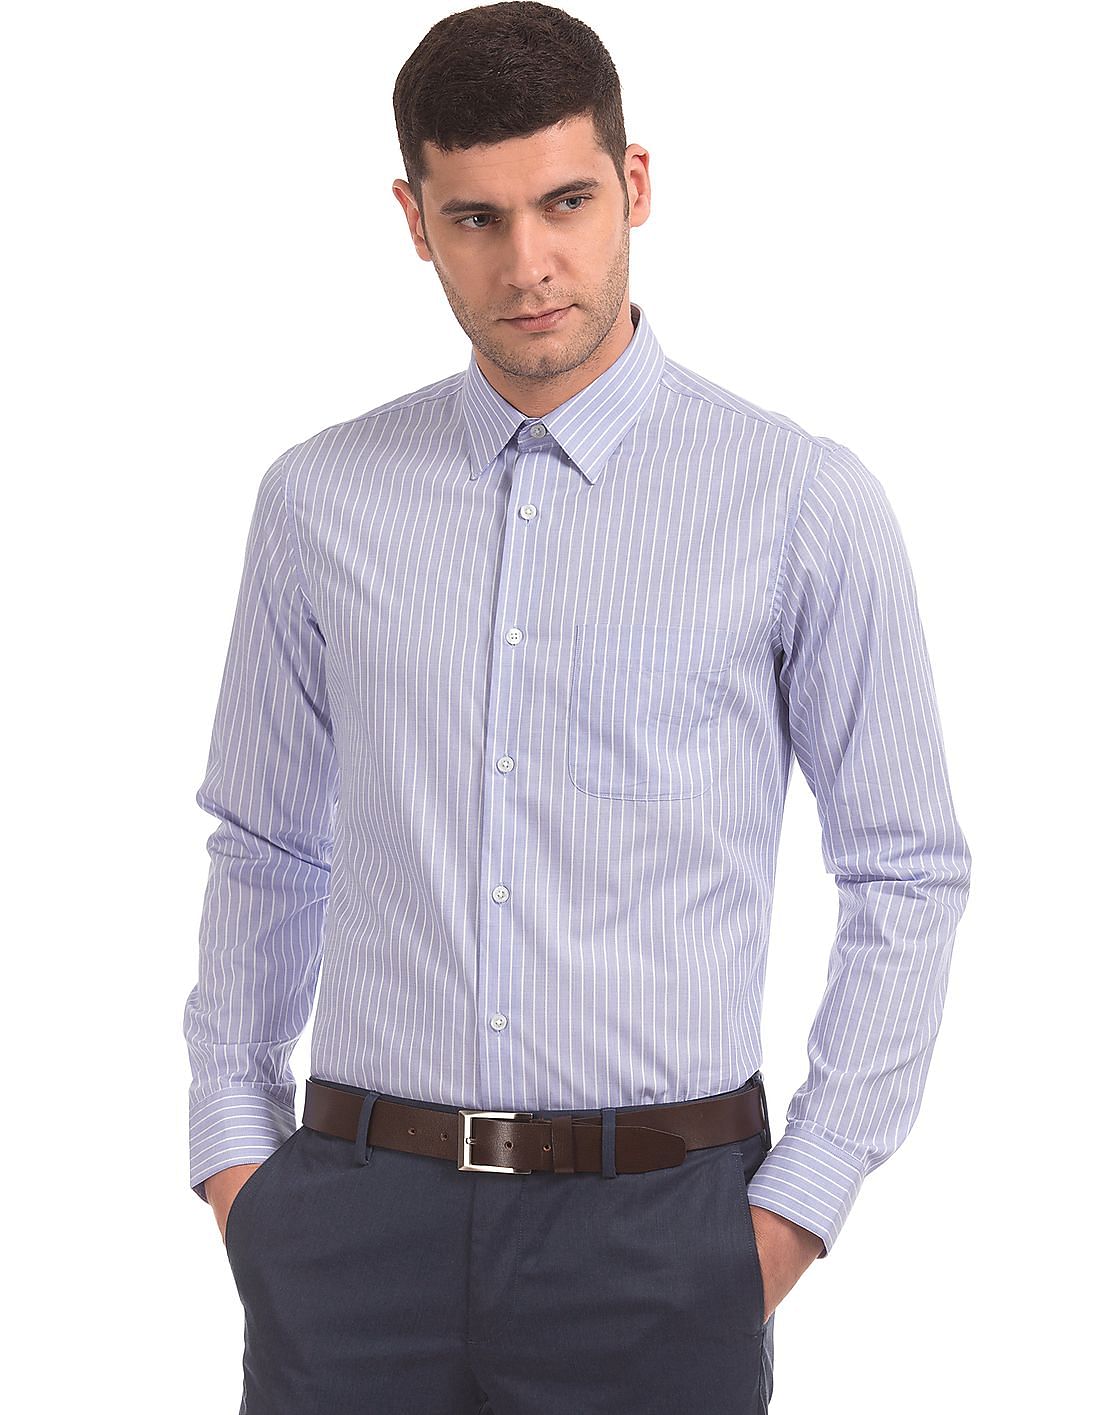 Buy USPA Tailored Men Tailored Fit Striped Shirt - NNNOW.com